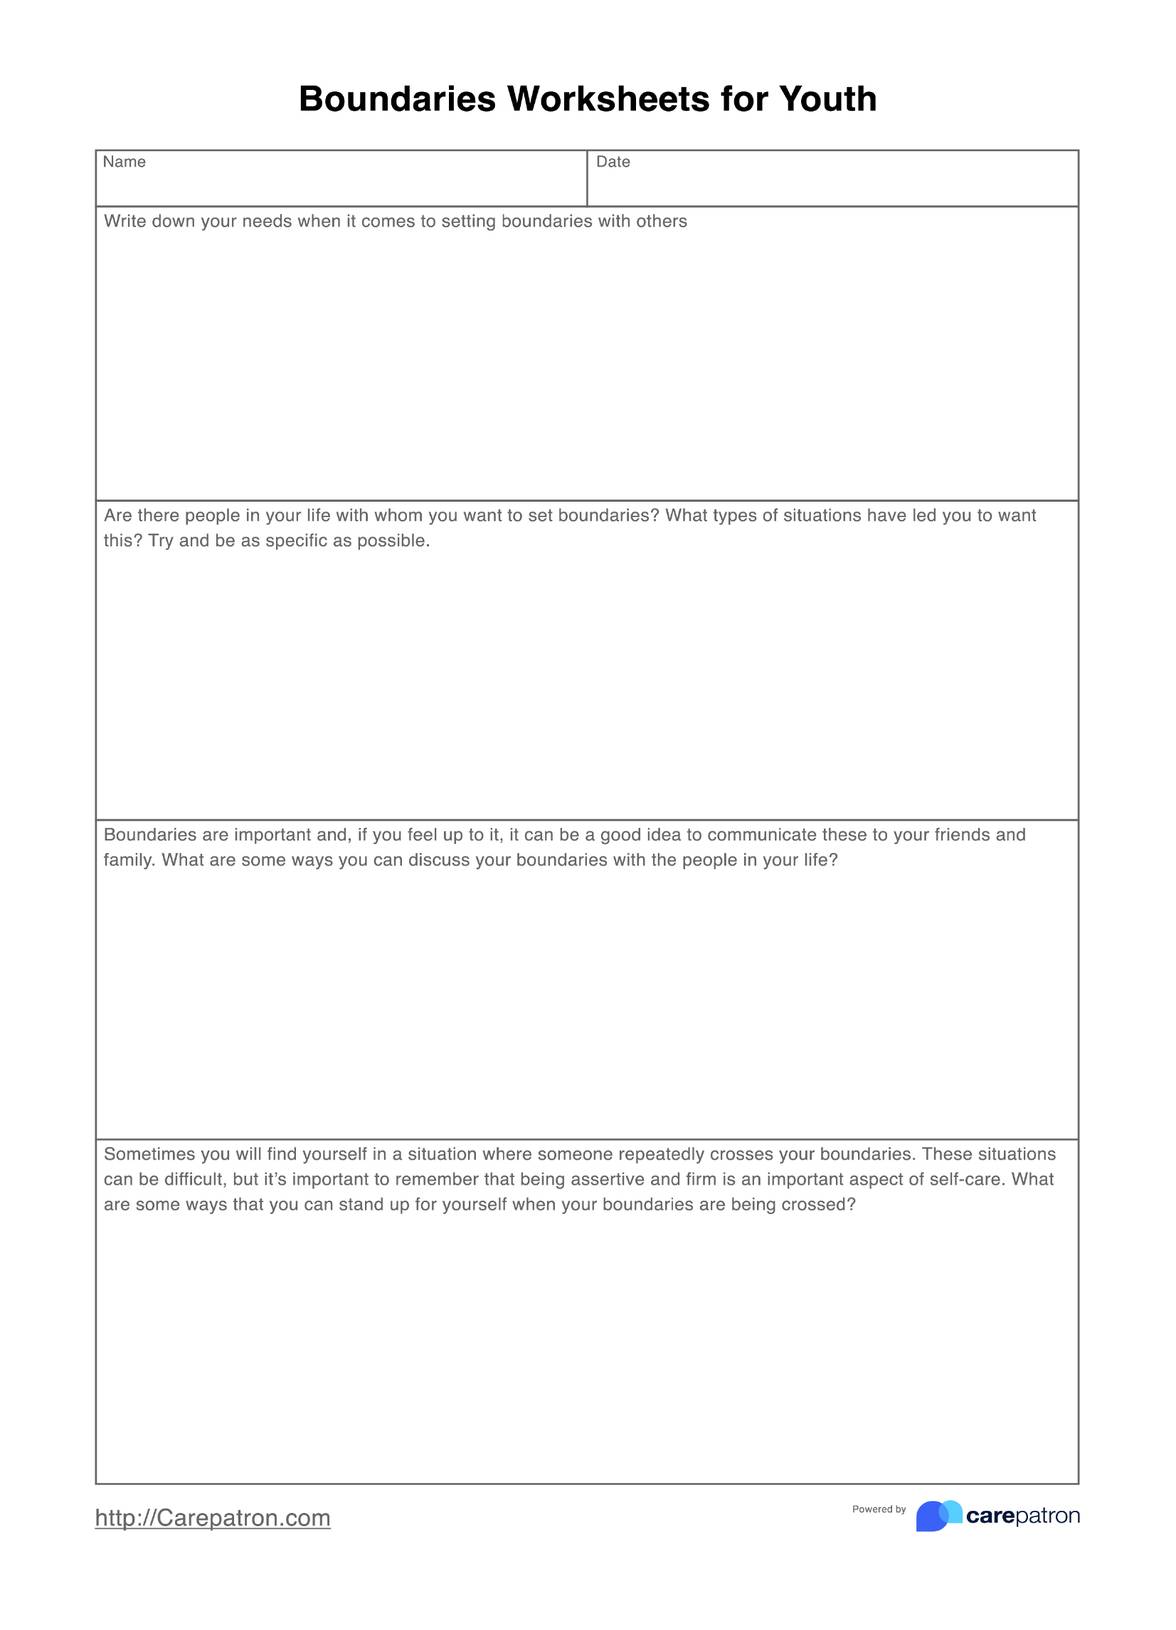 Boundaries Worksheets For Youth PDF Example